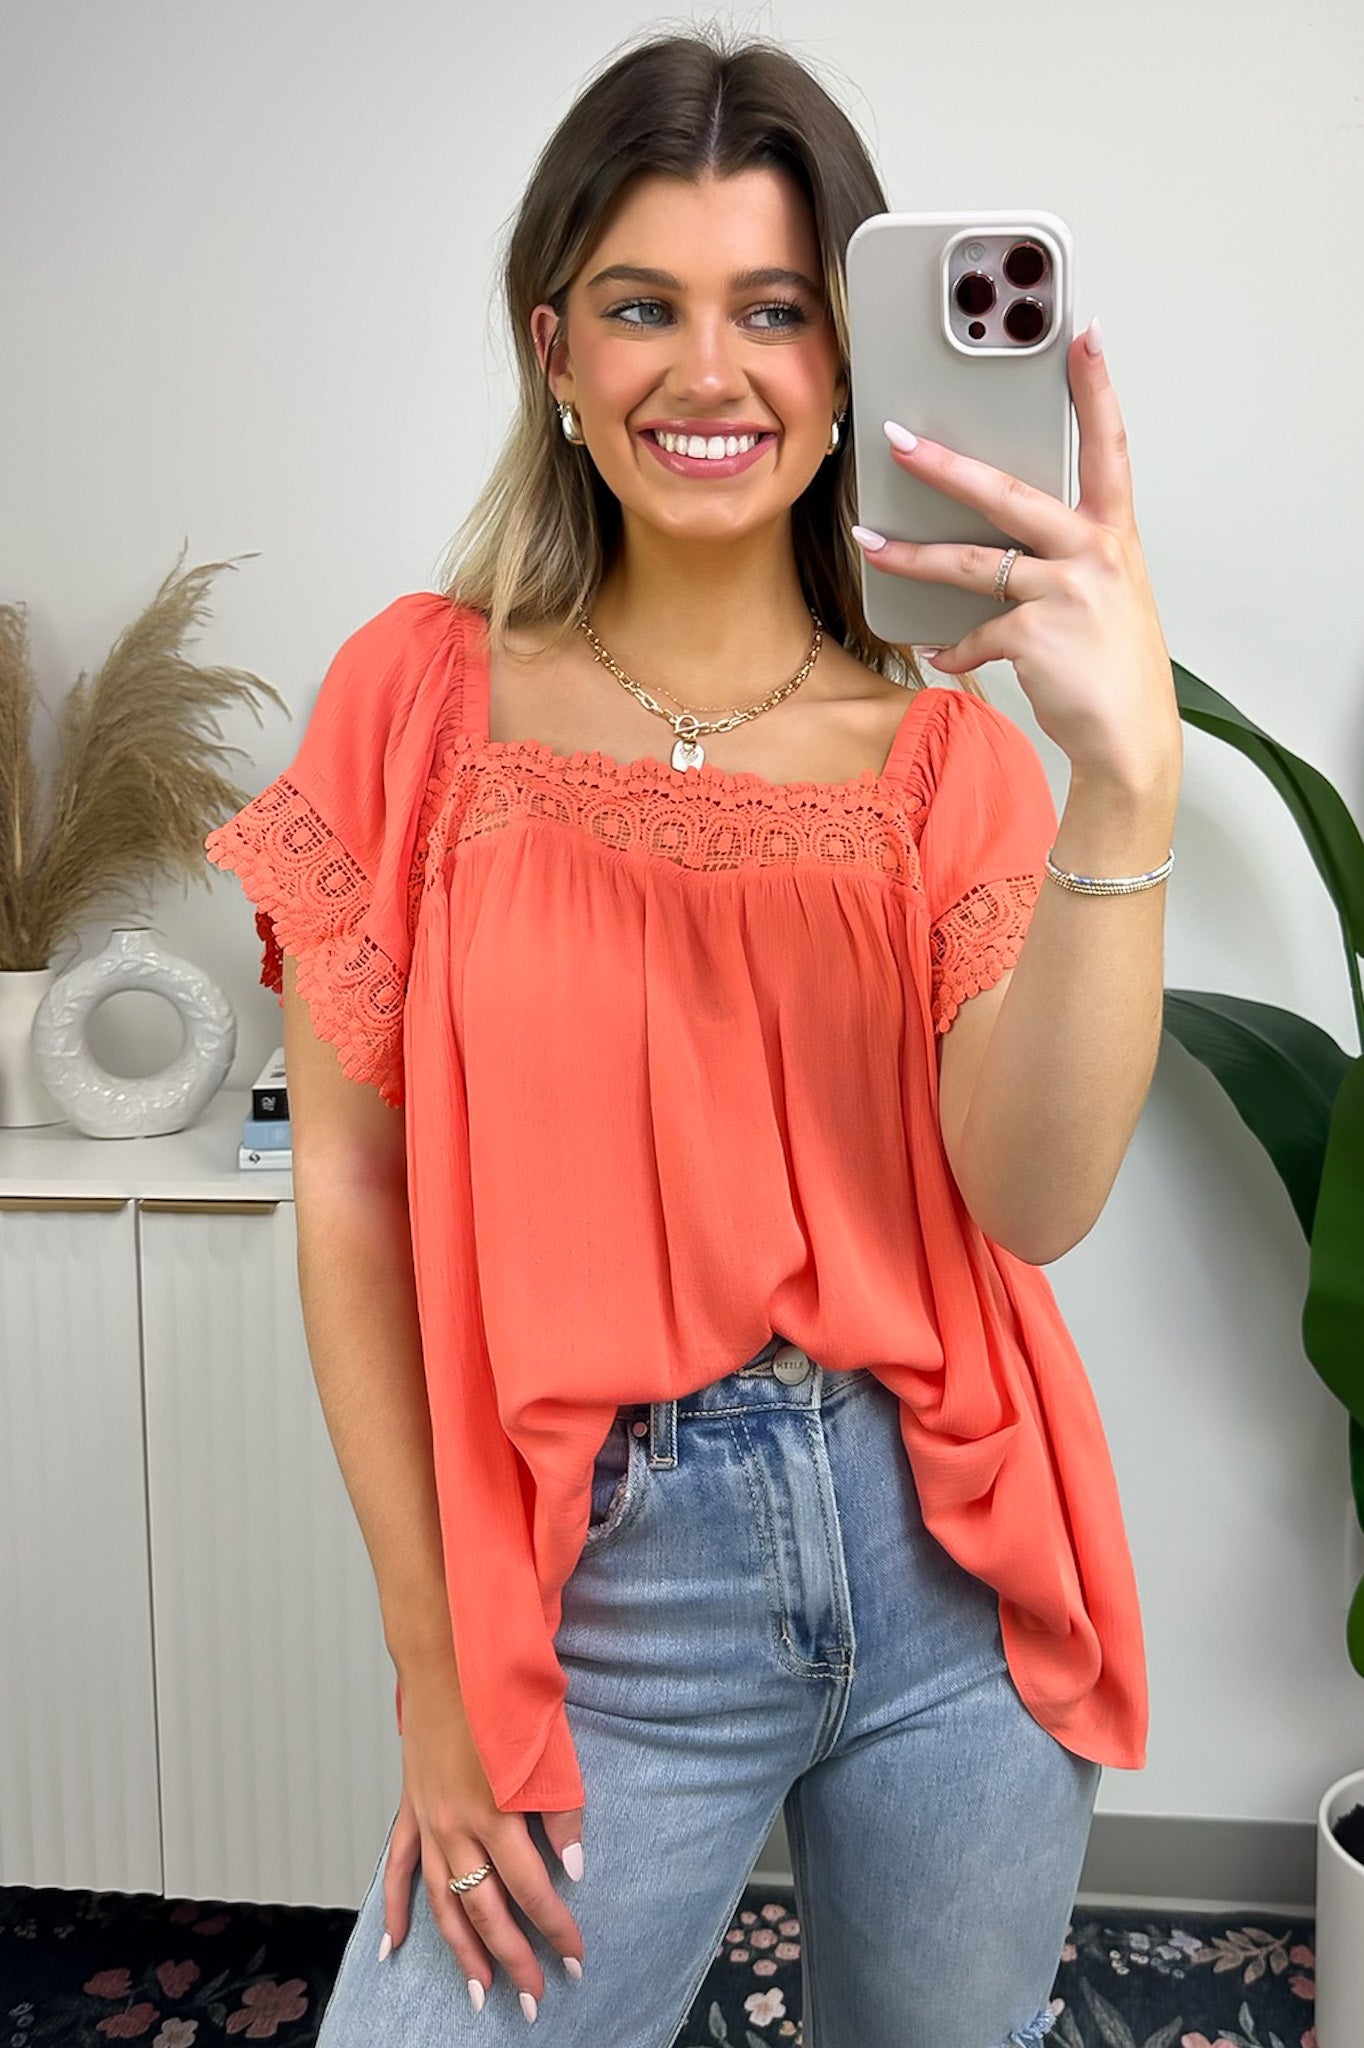  Cristyl Square Neck Crochet Trim Top - Madison and Mallory